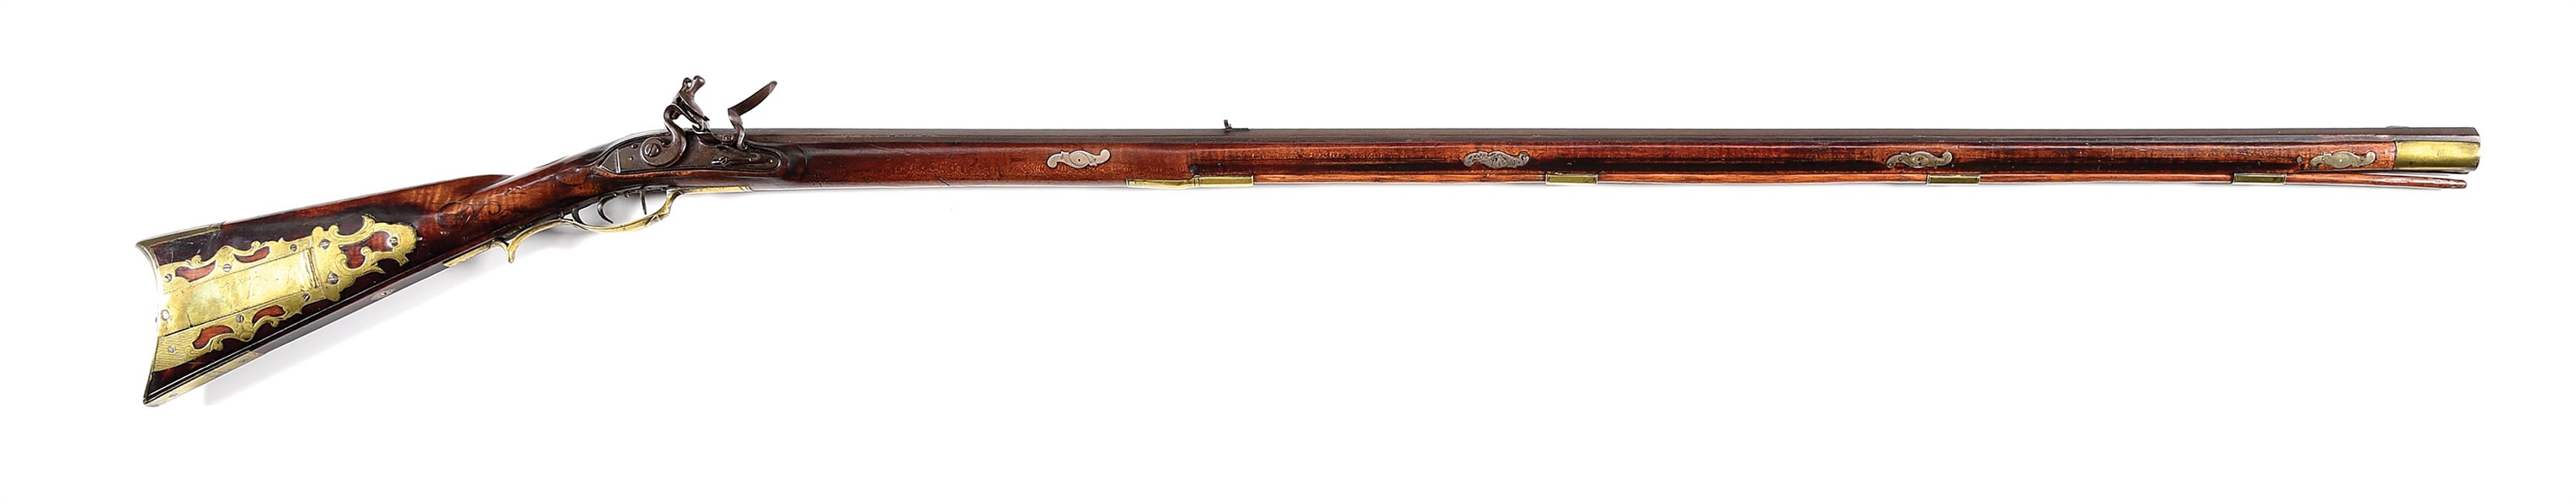 (A) EXTRA FINE RAISED CARVED FLINTLOCK KENTUCKY RIFLE SIGNED W. ROGERS.